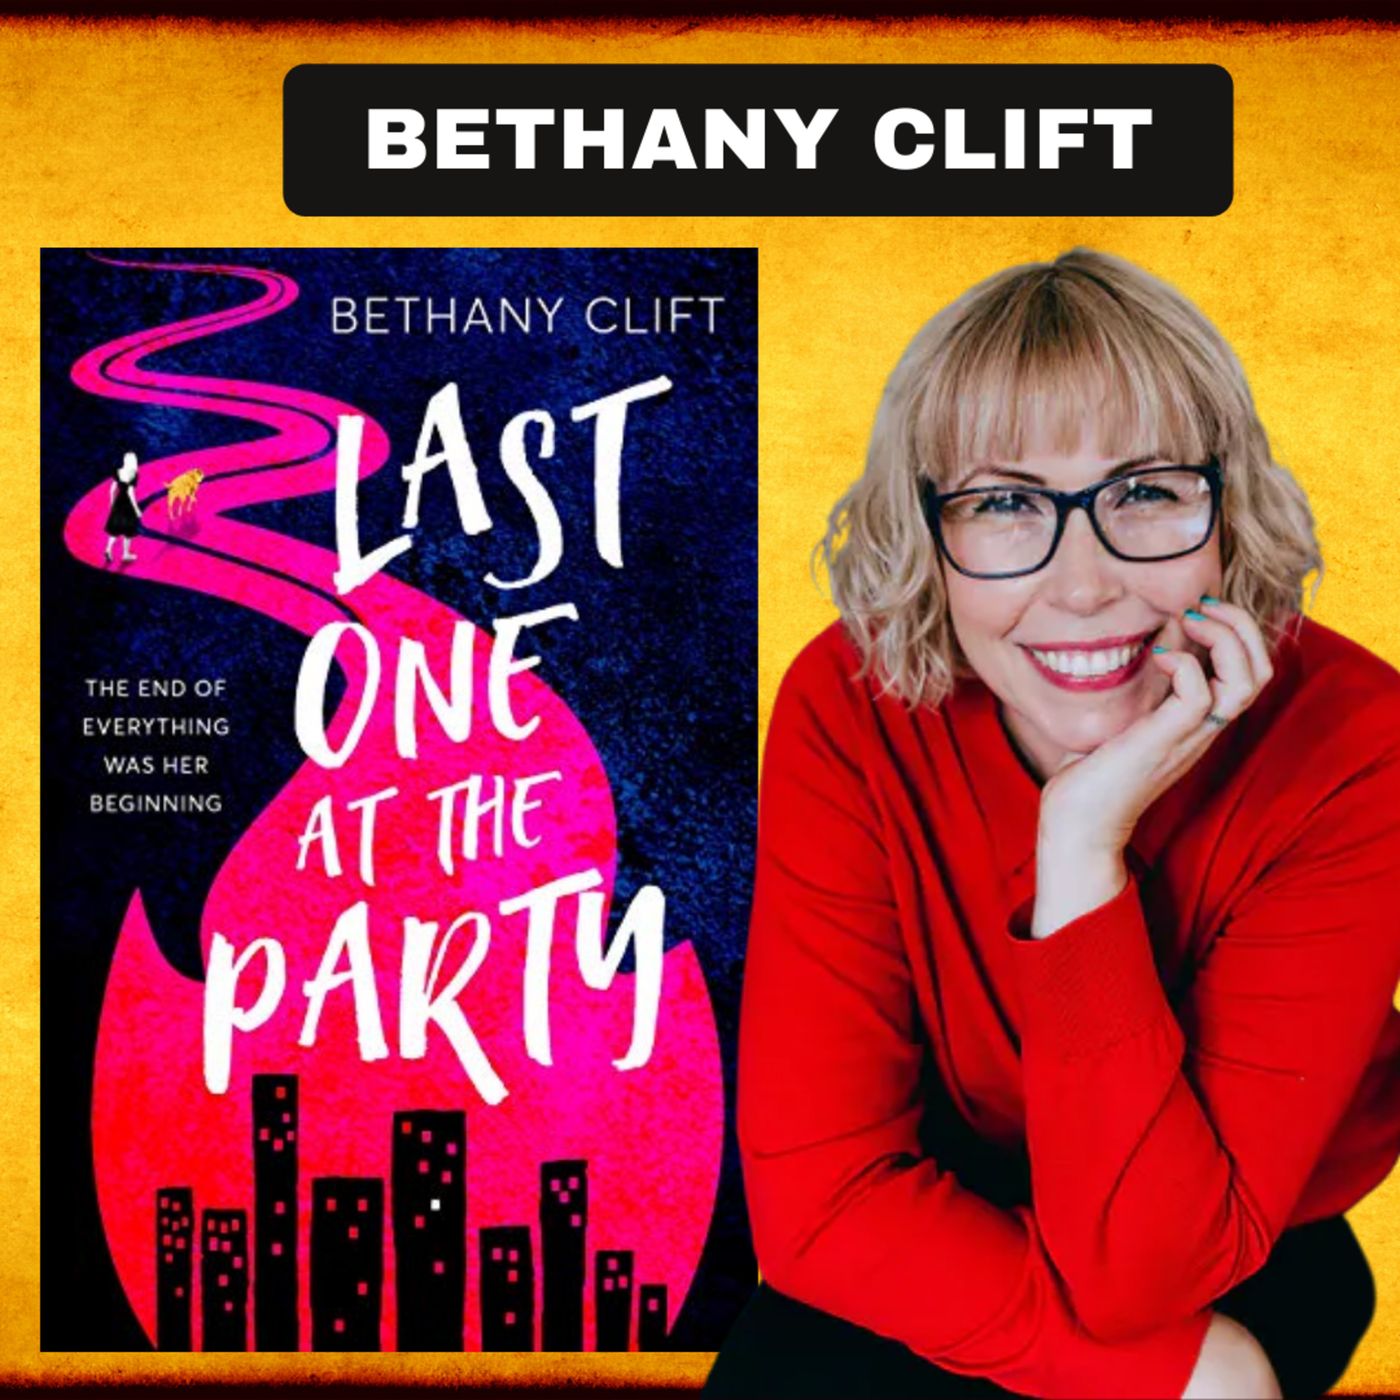 Bethany Clift: author of THE LAST ONE AT THE PARTY, on The WCCS!